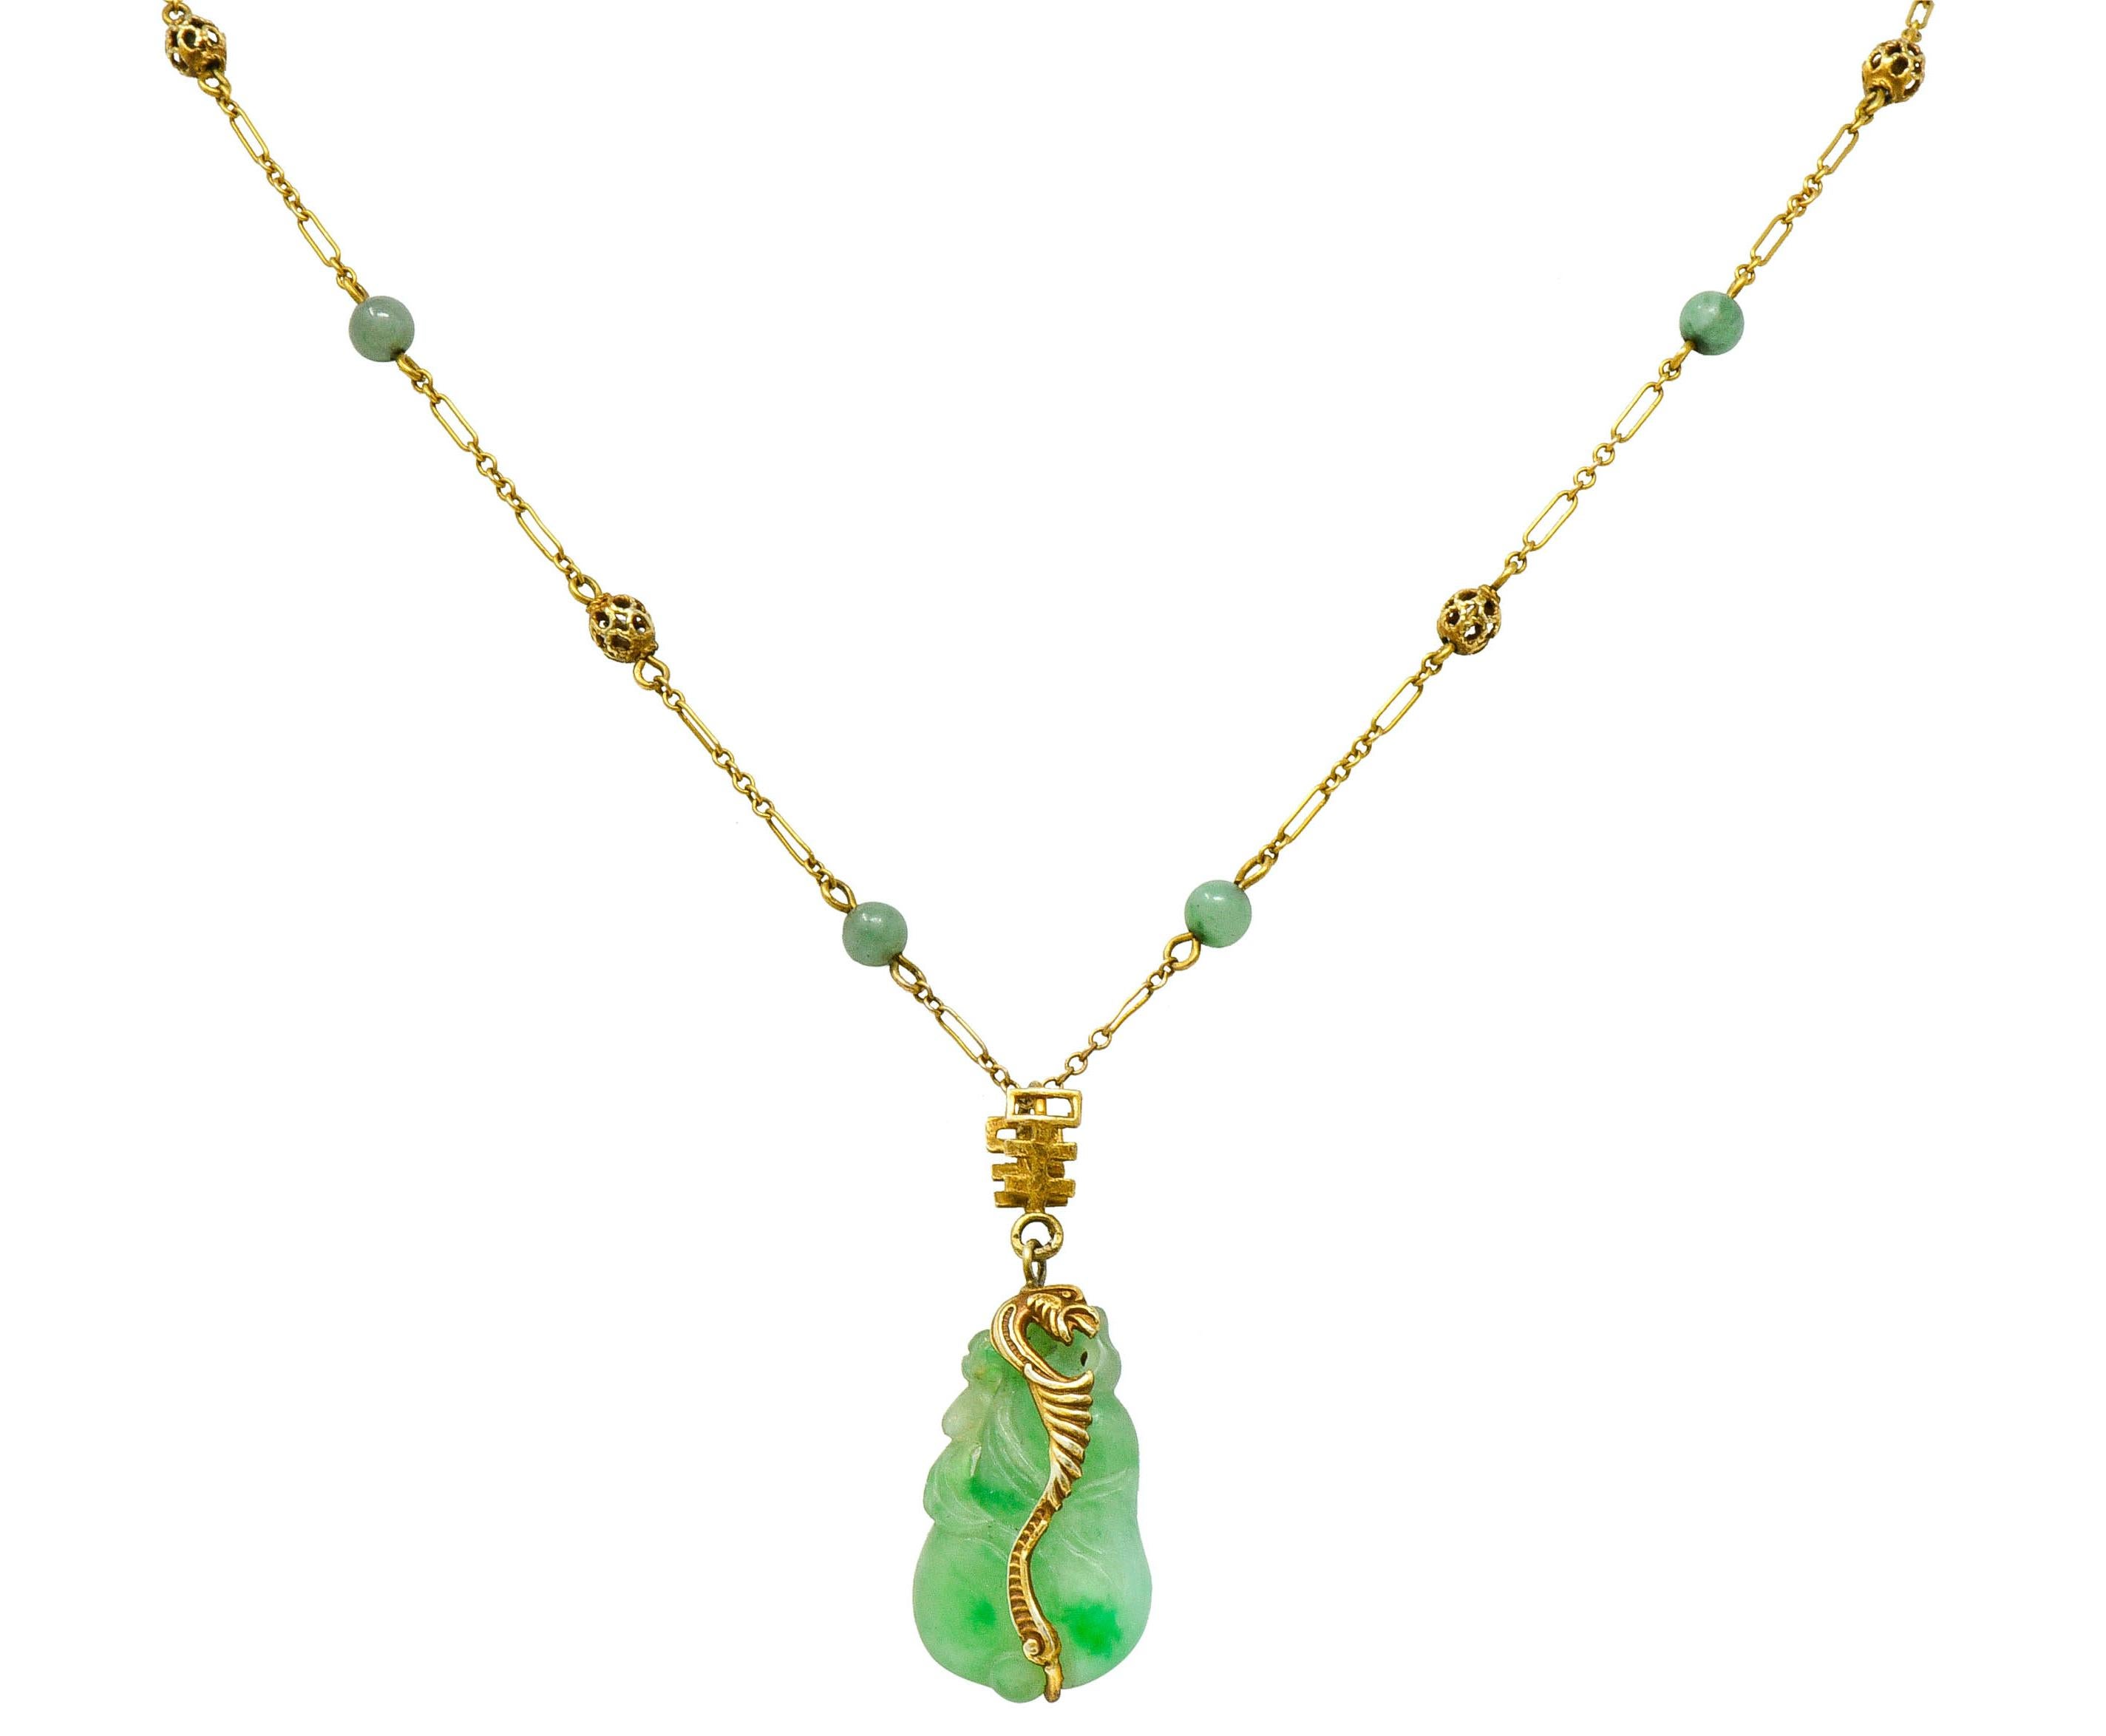 Paperclip style chain necklace is accented by 4.0 mm gold ball and 4.2 mm jade ball stations throughout

Suspending a drop of carved jade, translucent with natural veining, and strongly light green to green in color

Affixed to necklace by a gold